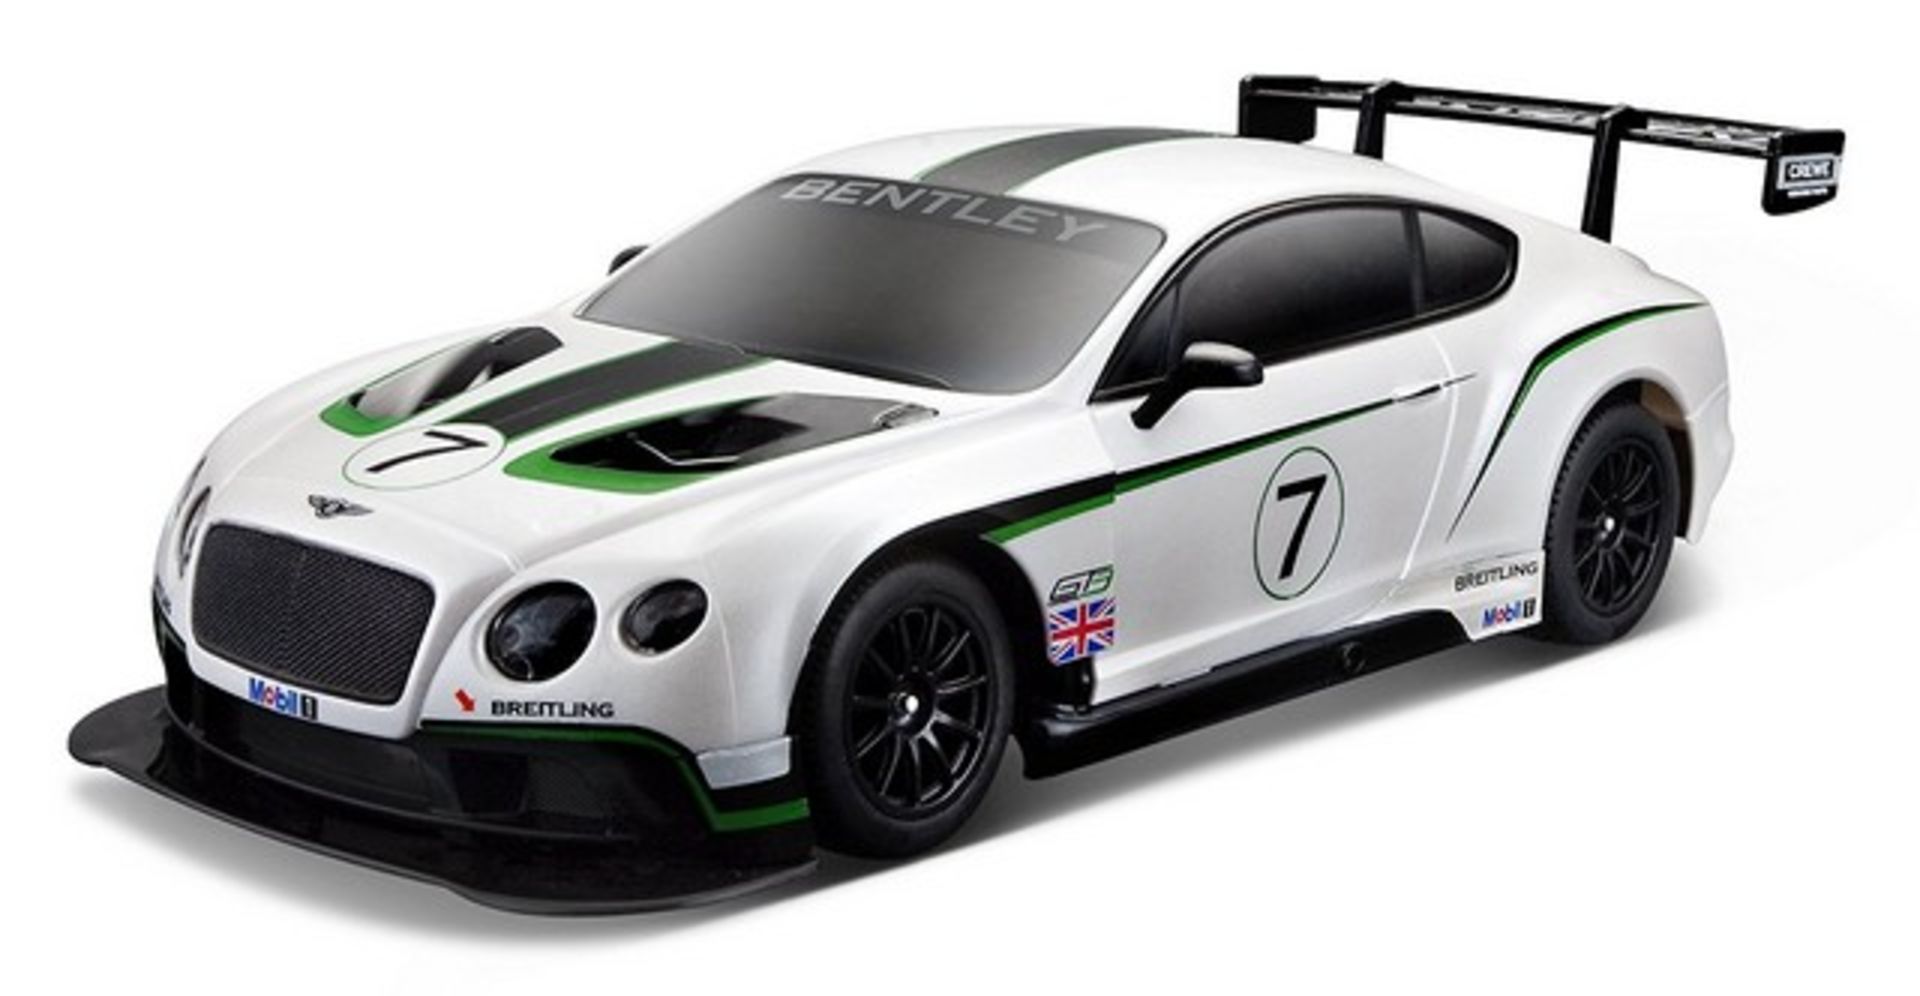 + VAT Brand New R/C 1:14 Scale Bentley Continental GT3 - Amazon price £36.99 - Colours May Vary